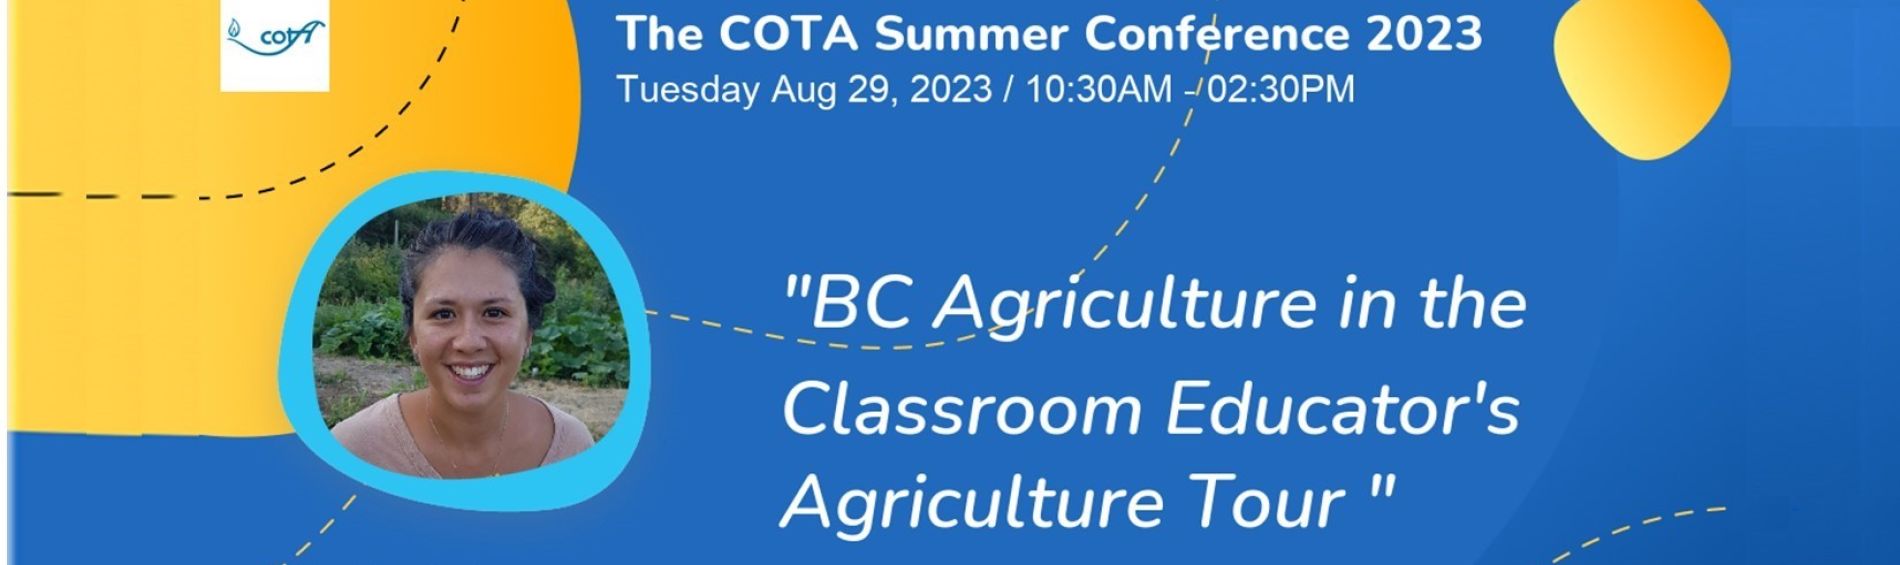 COTA Summer Conference: A Day of Learning and Inspiration